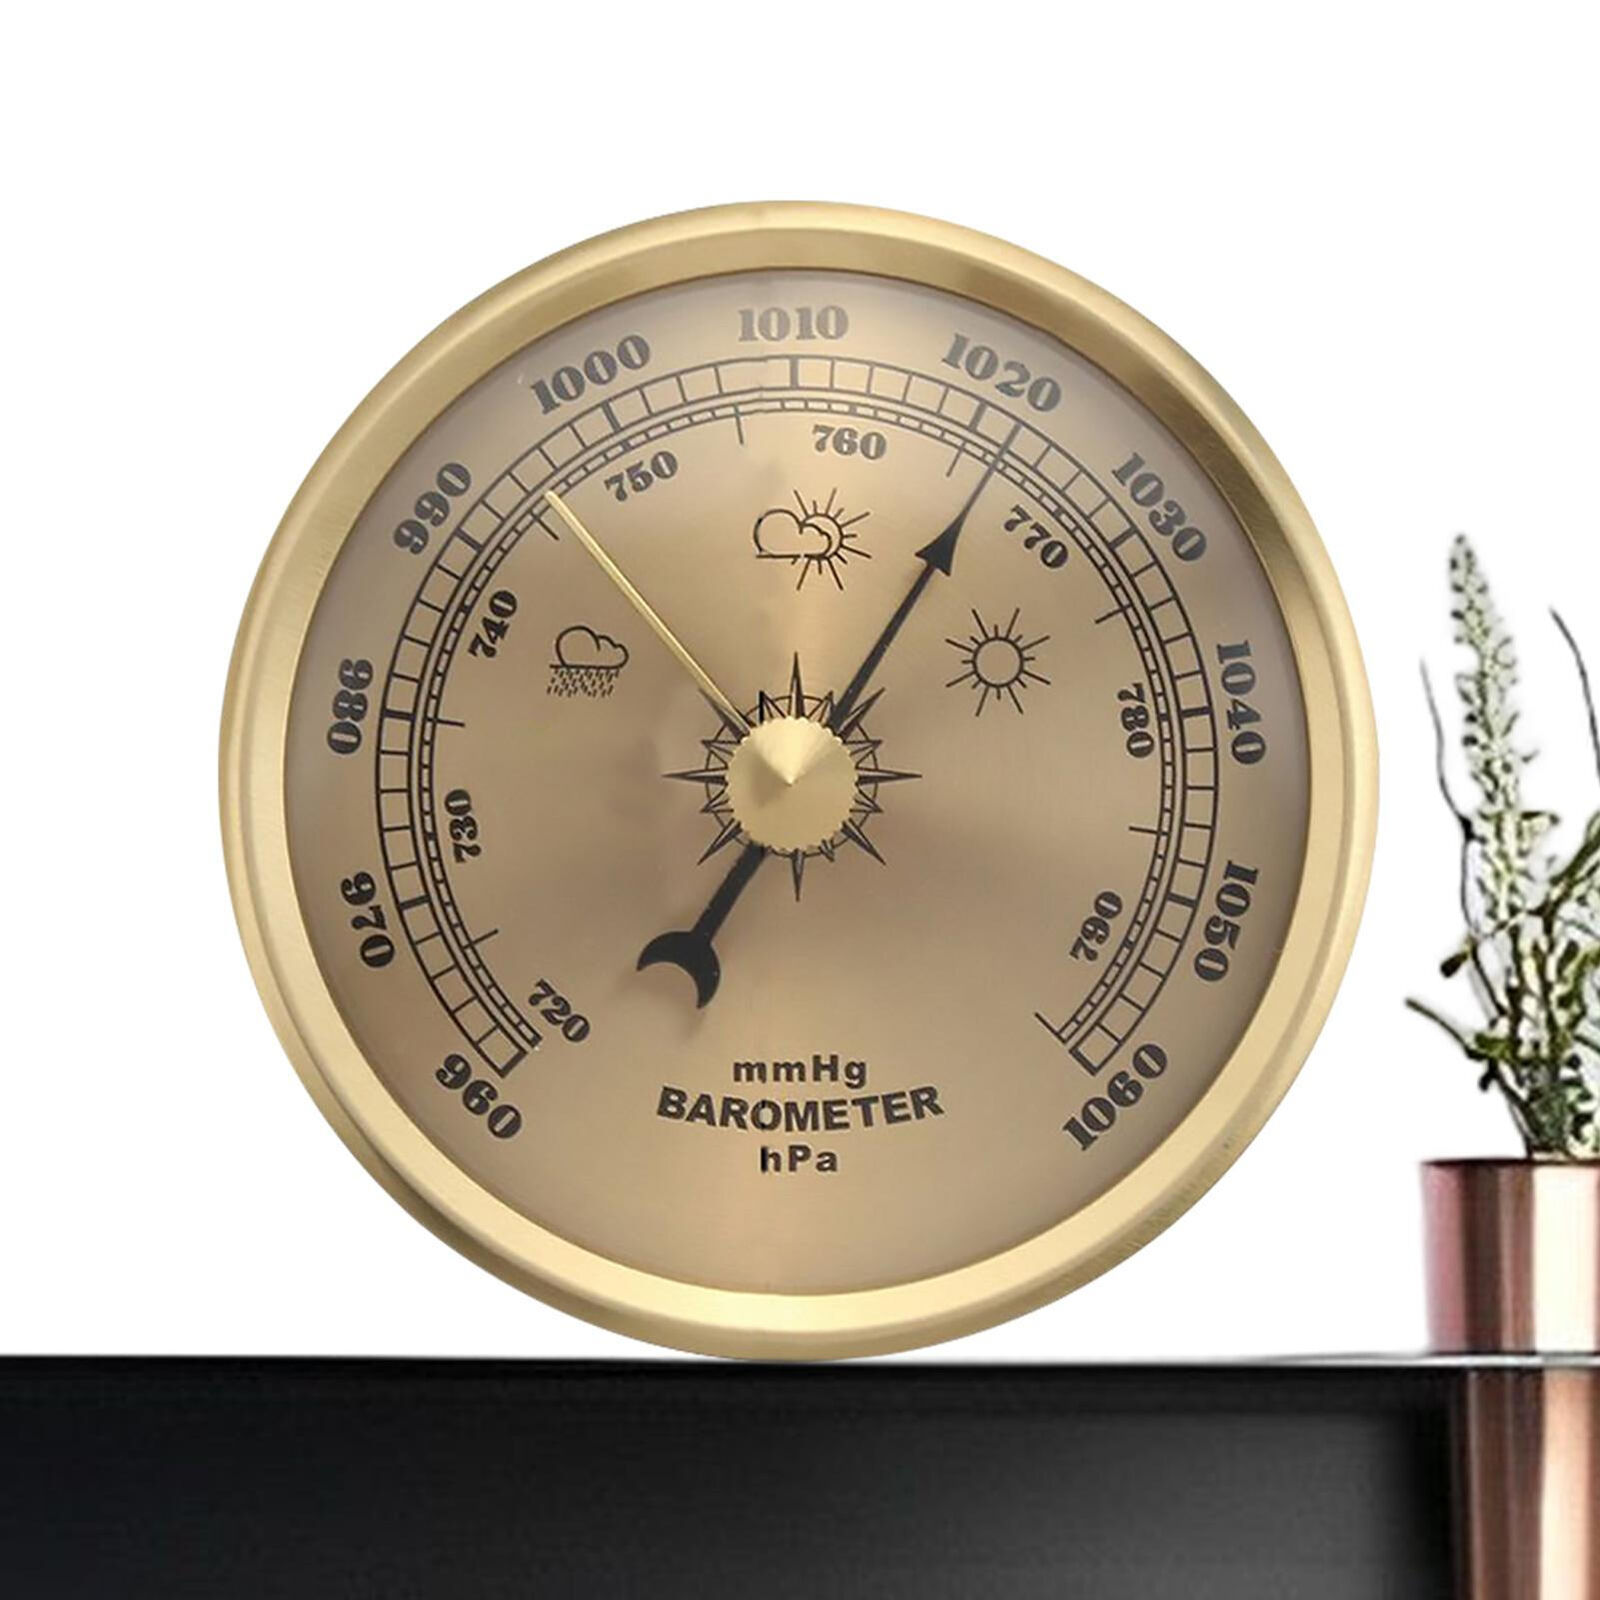 70 Mm Thermometer Barometer Barometer With Integrated Hygrometer New